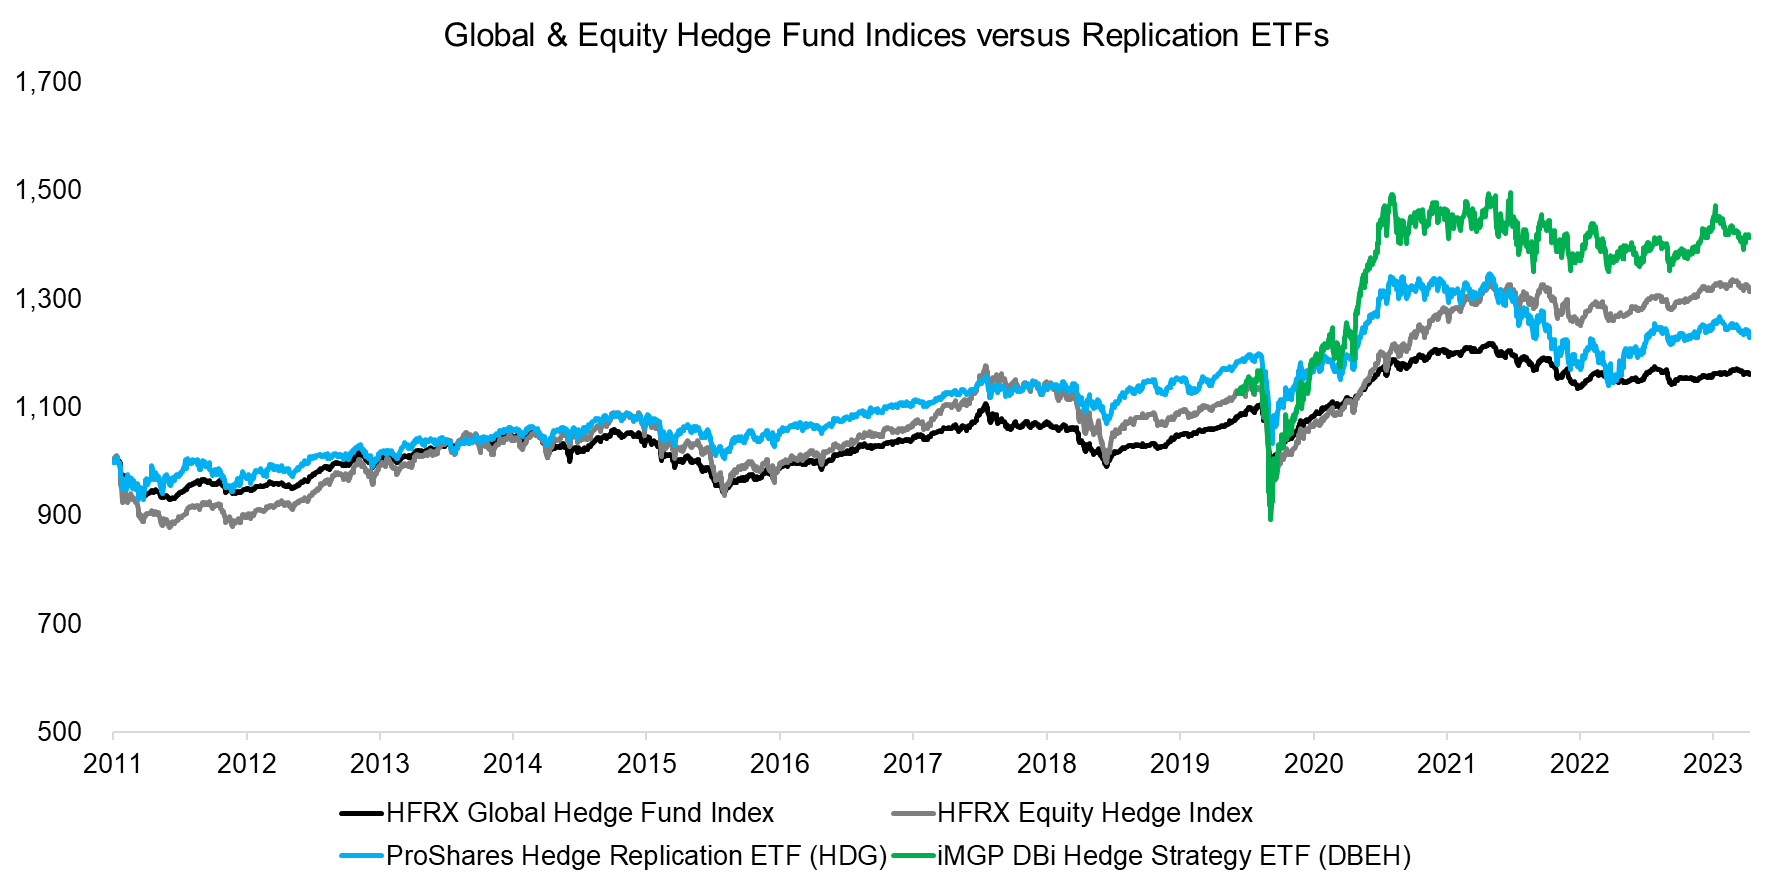 Global & Equity Hedge Fund Indices versus Replication ETFs